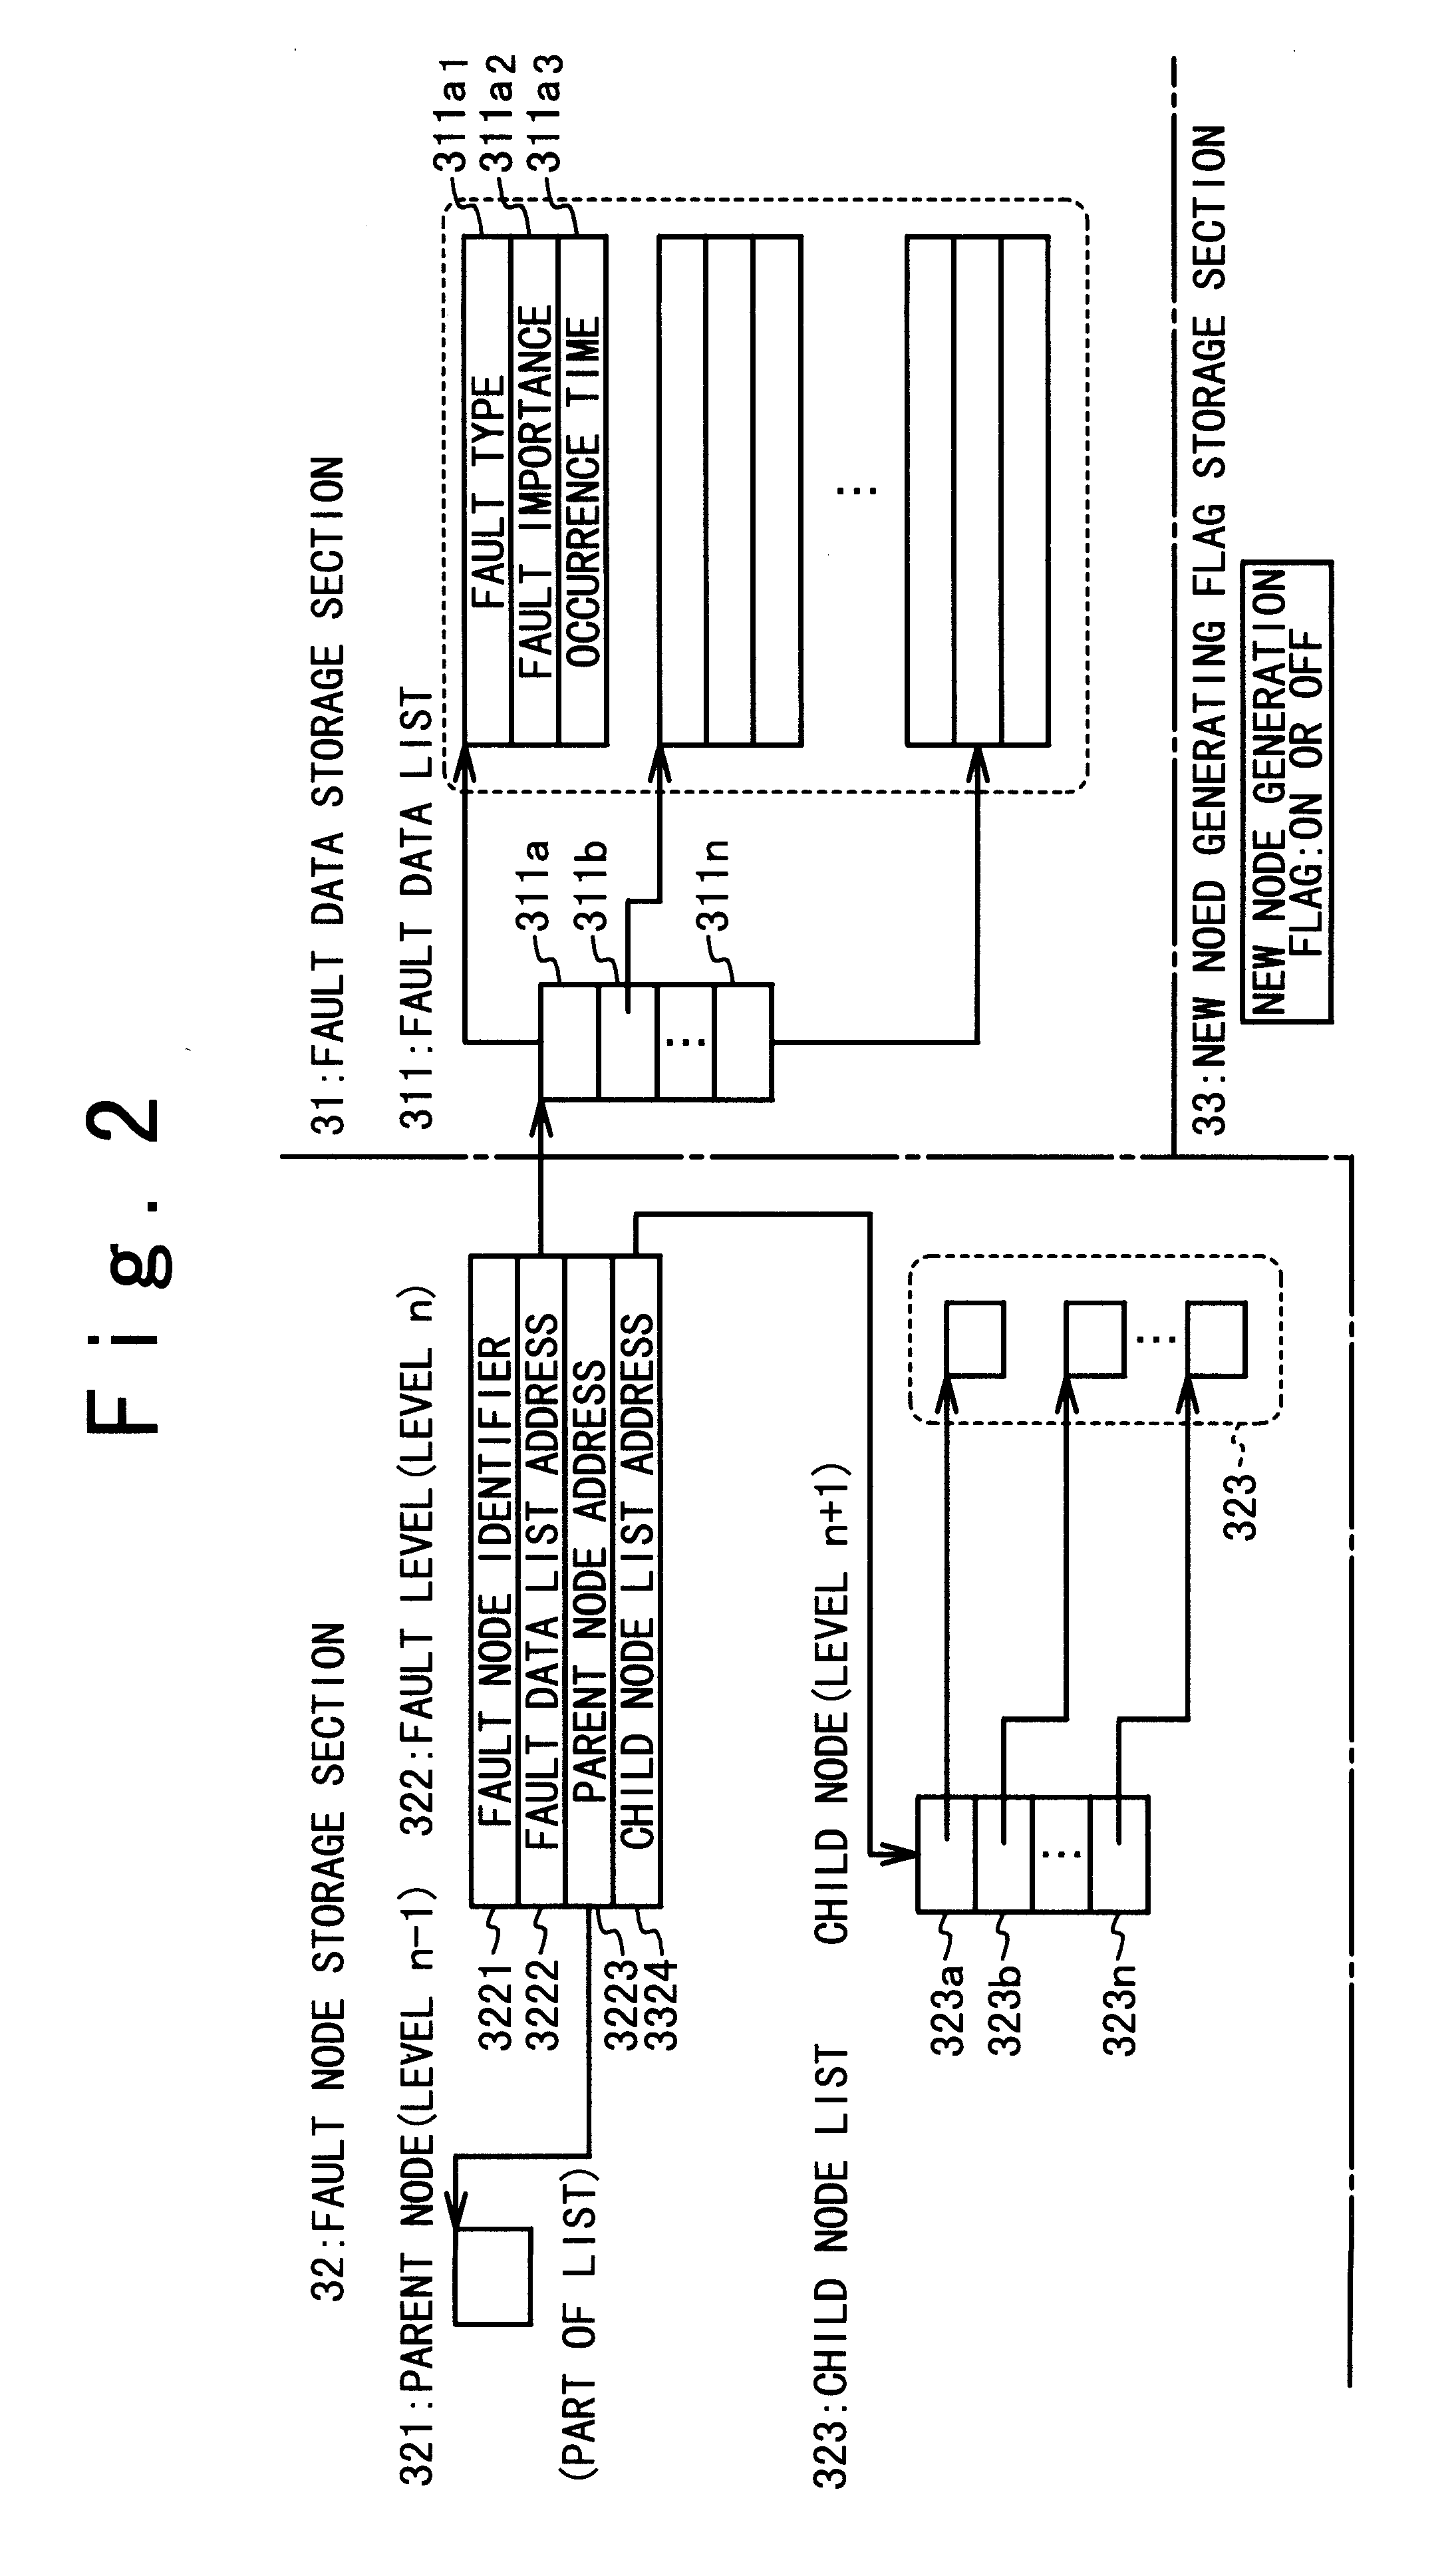 Network fault information management system in which fault nodes are displayed in tree form